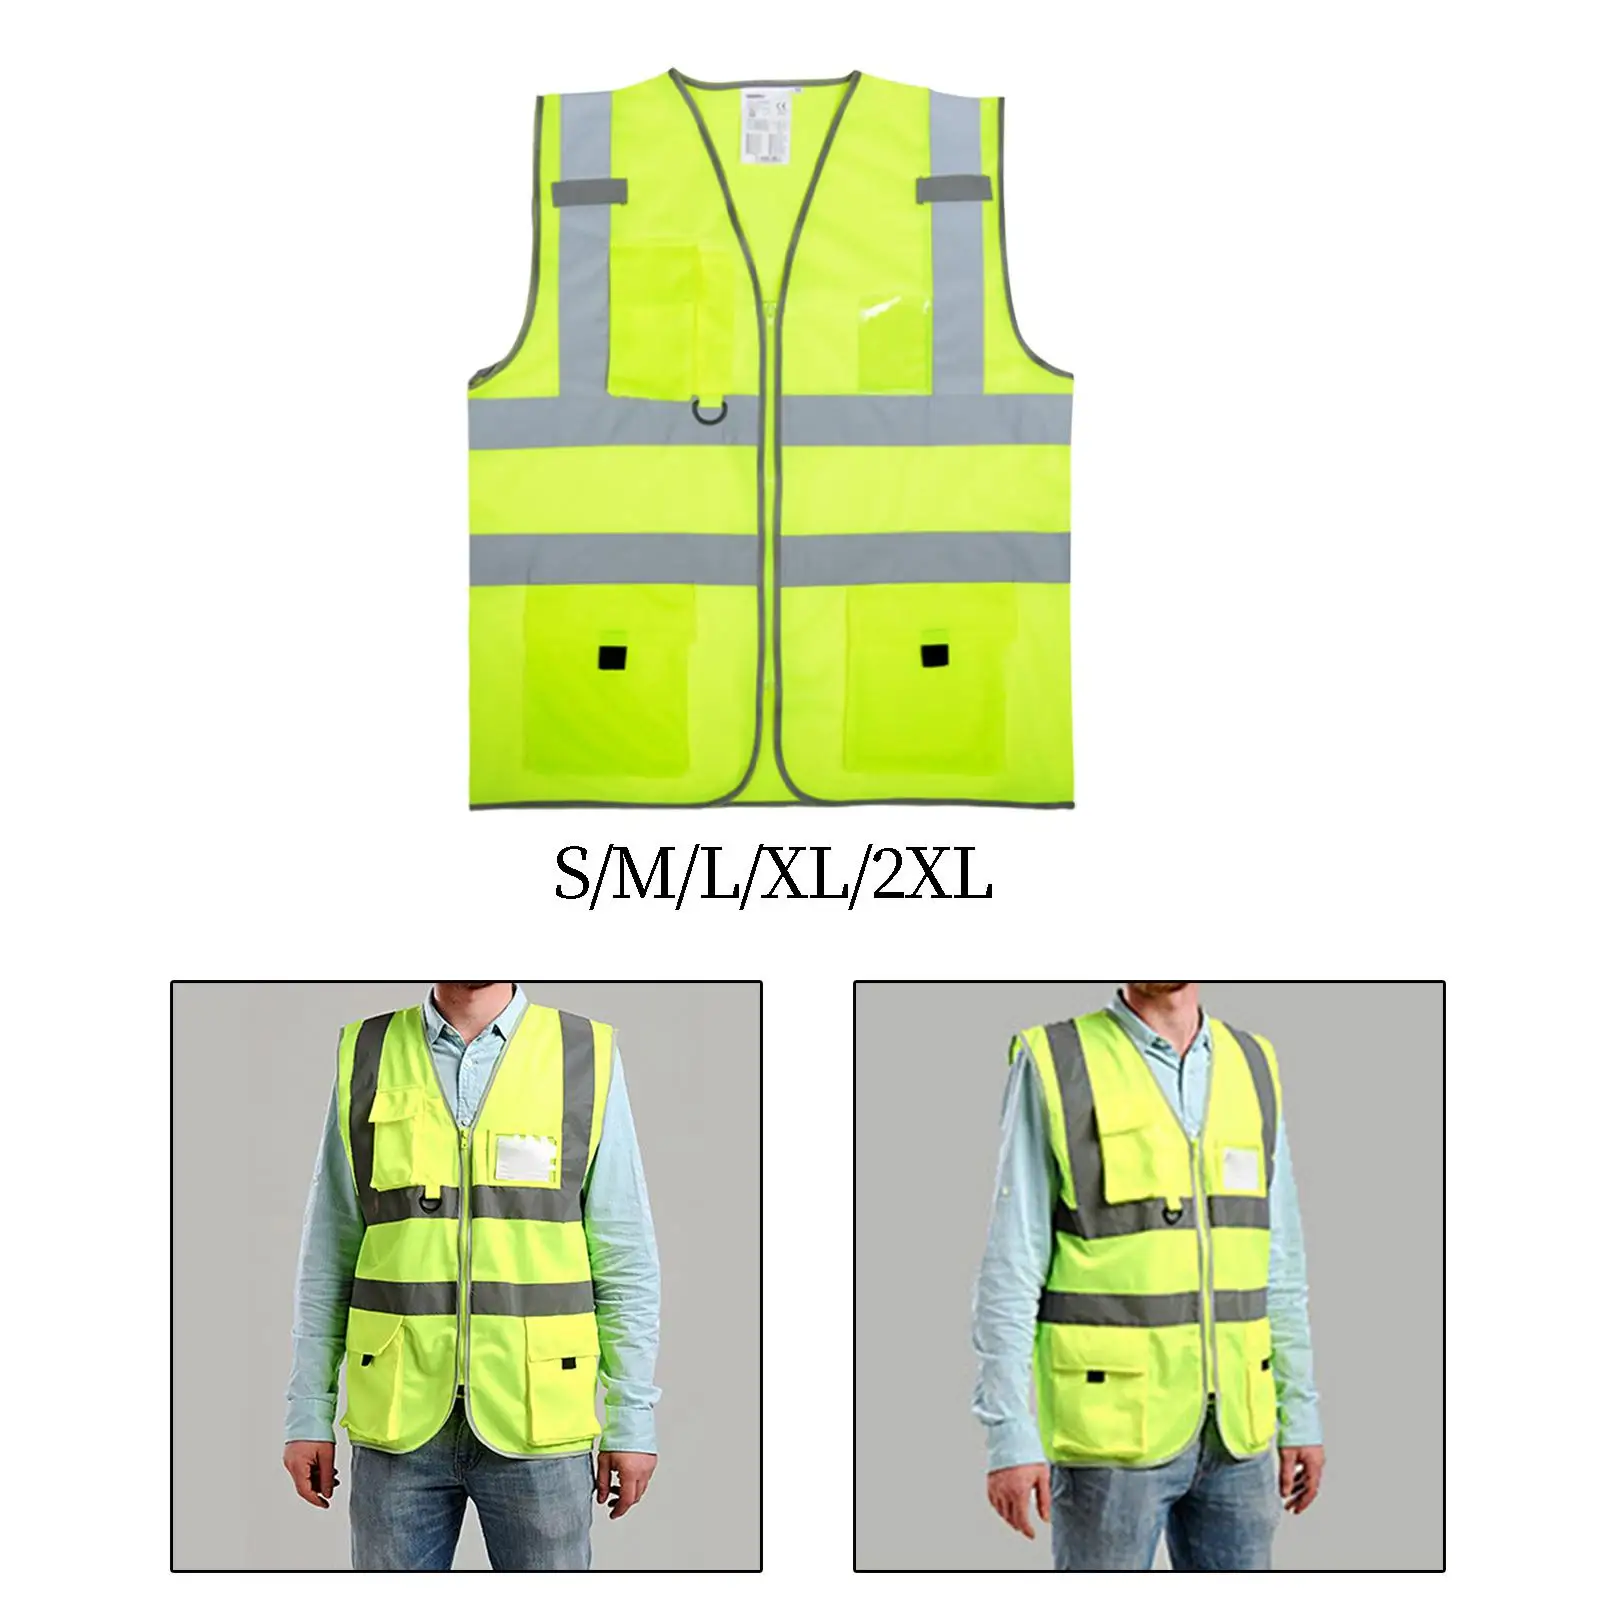 Reflective Vest Sleeveless Highlight Engineer Vest Construction Protector for Workers Indoor Construction Racing Running Sports